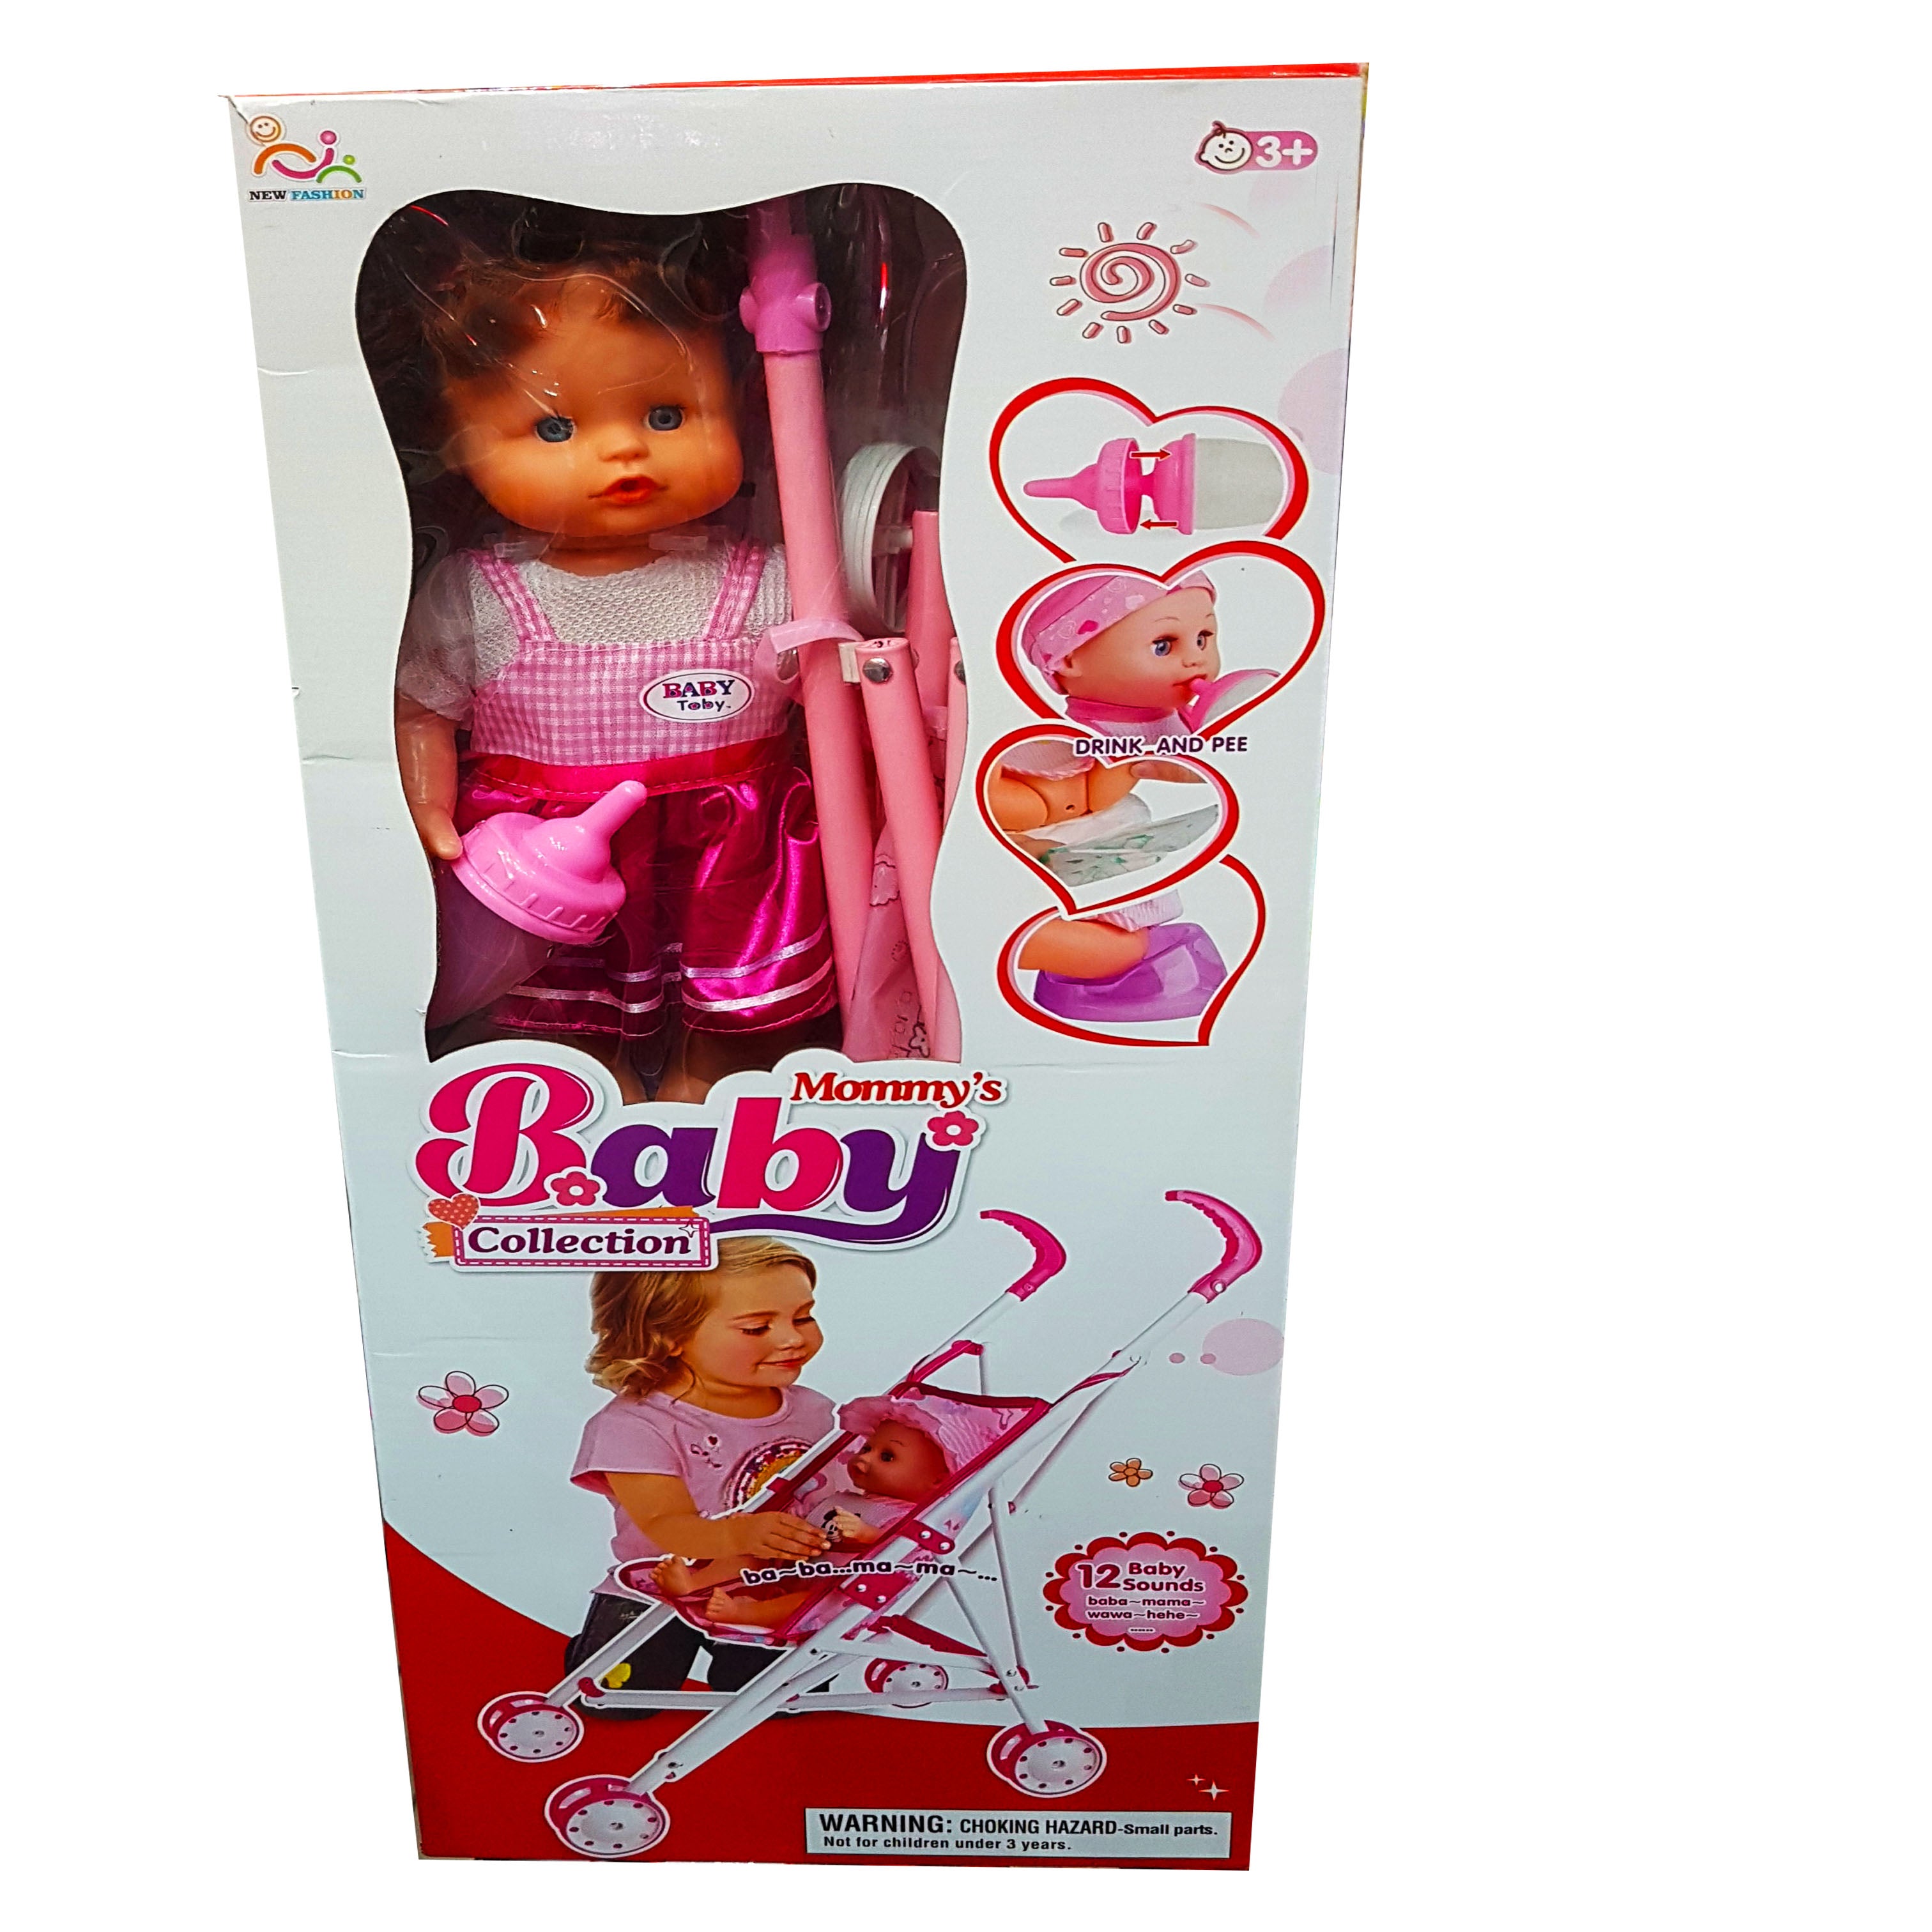 New Arrival: Interactive Baby Doll with Stroller & Feeder - 12 Baby Sounds, Drink & Wet Feature, Perfect Gift for Girls